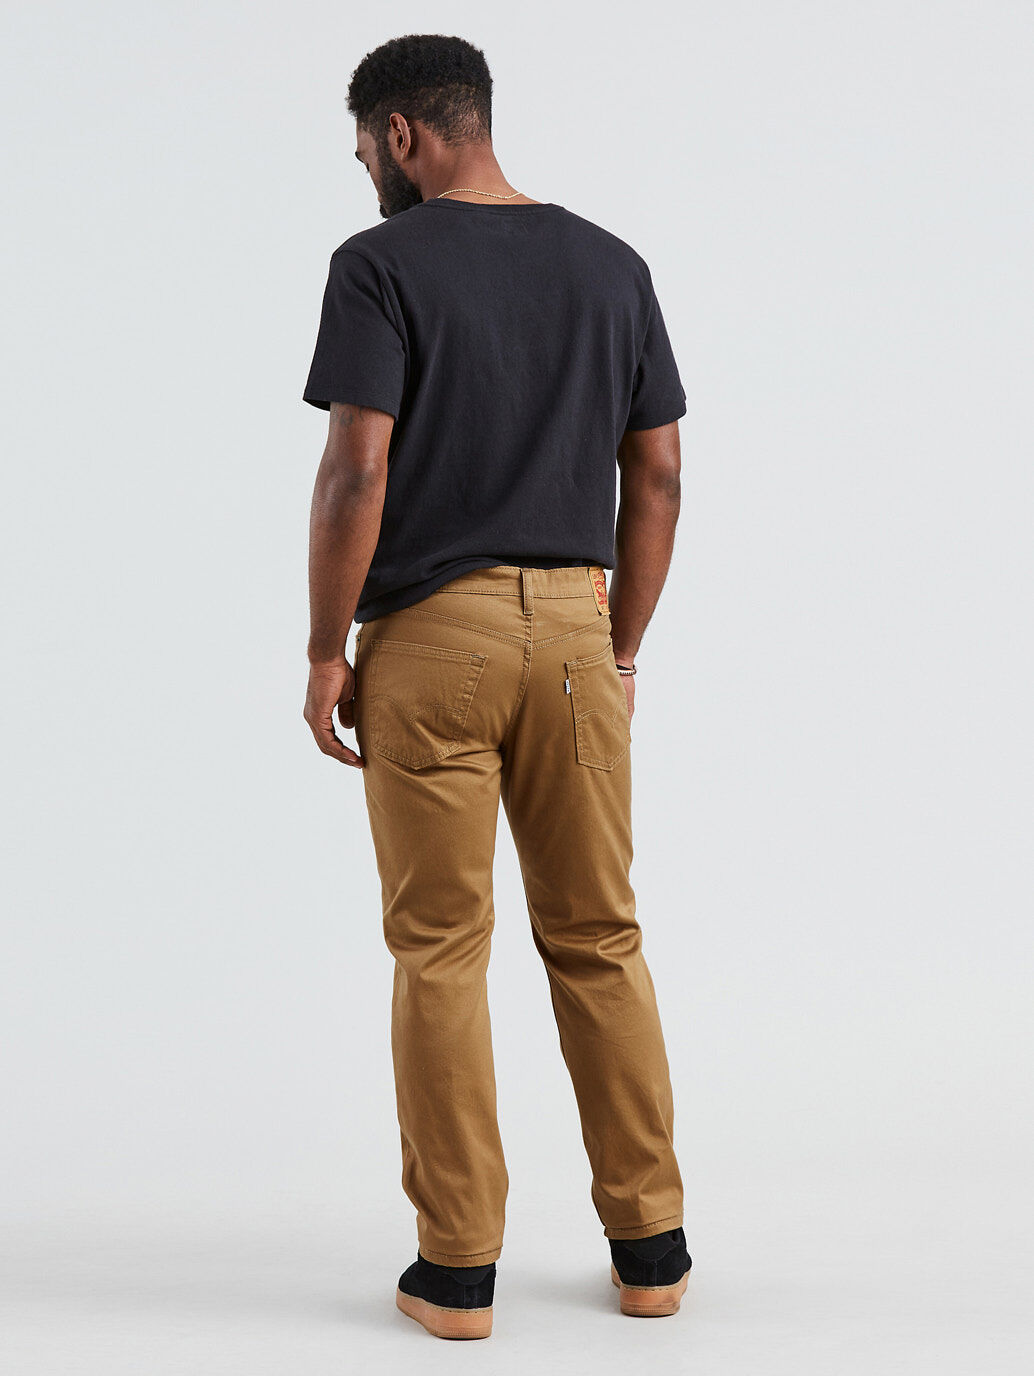 men's 541 athletic fit chino pant